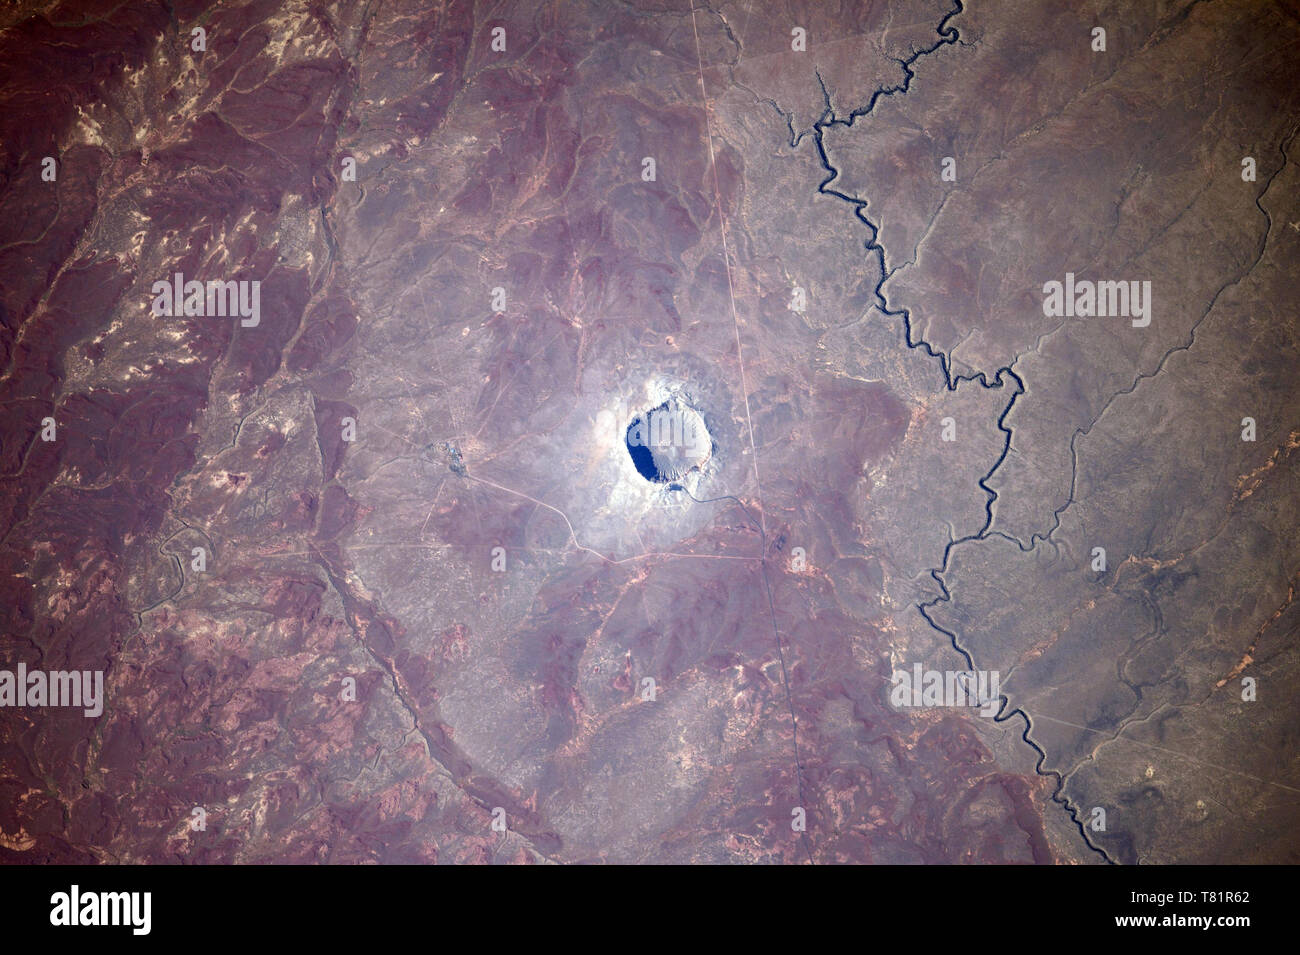 Barringer Crater, ISS Image Stock Photo